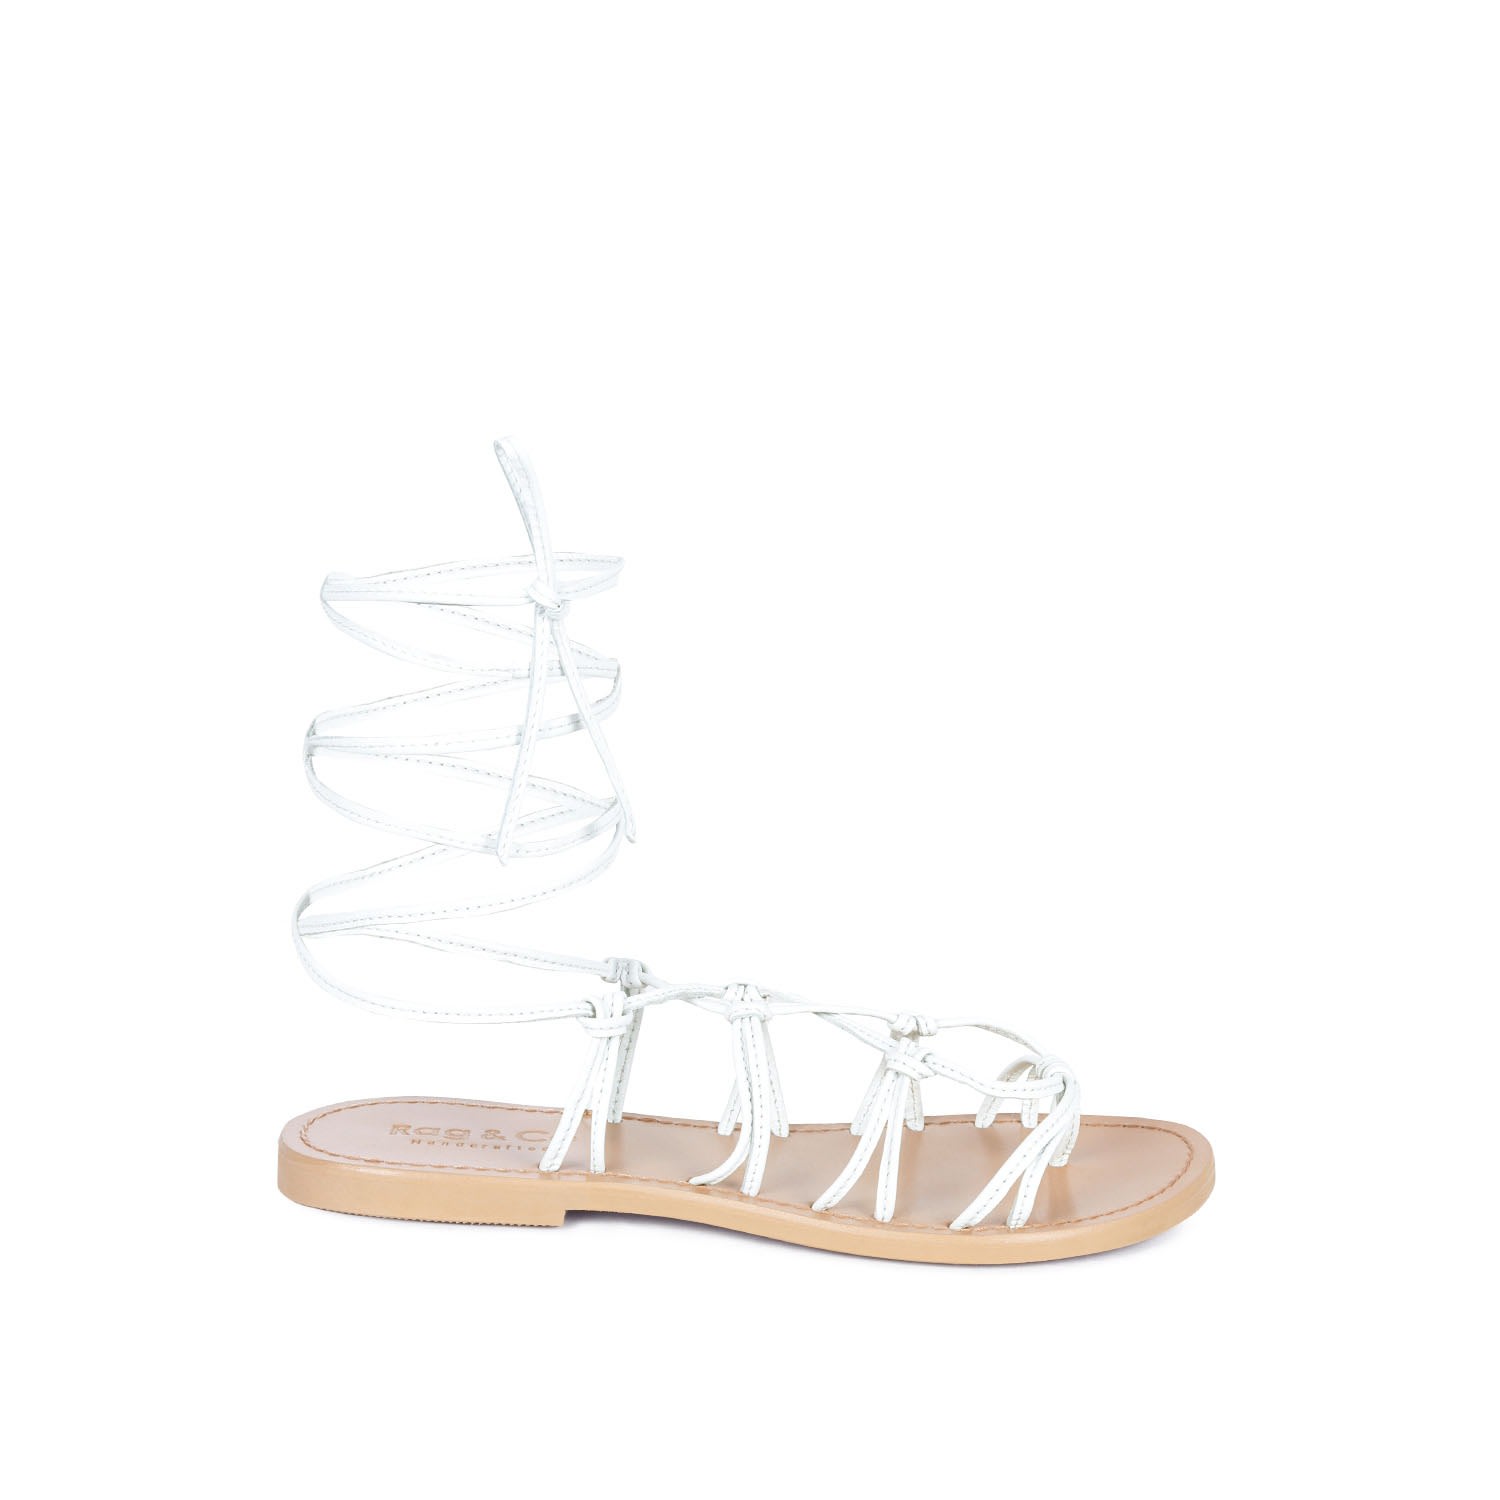 Shop Rag & Co Women's Baxea Handcrafted White Tie Up String Flats